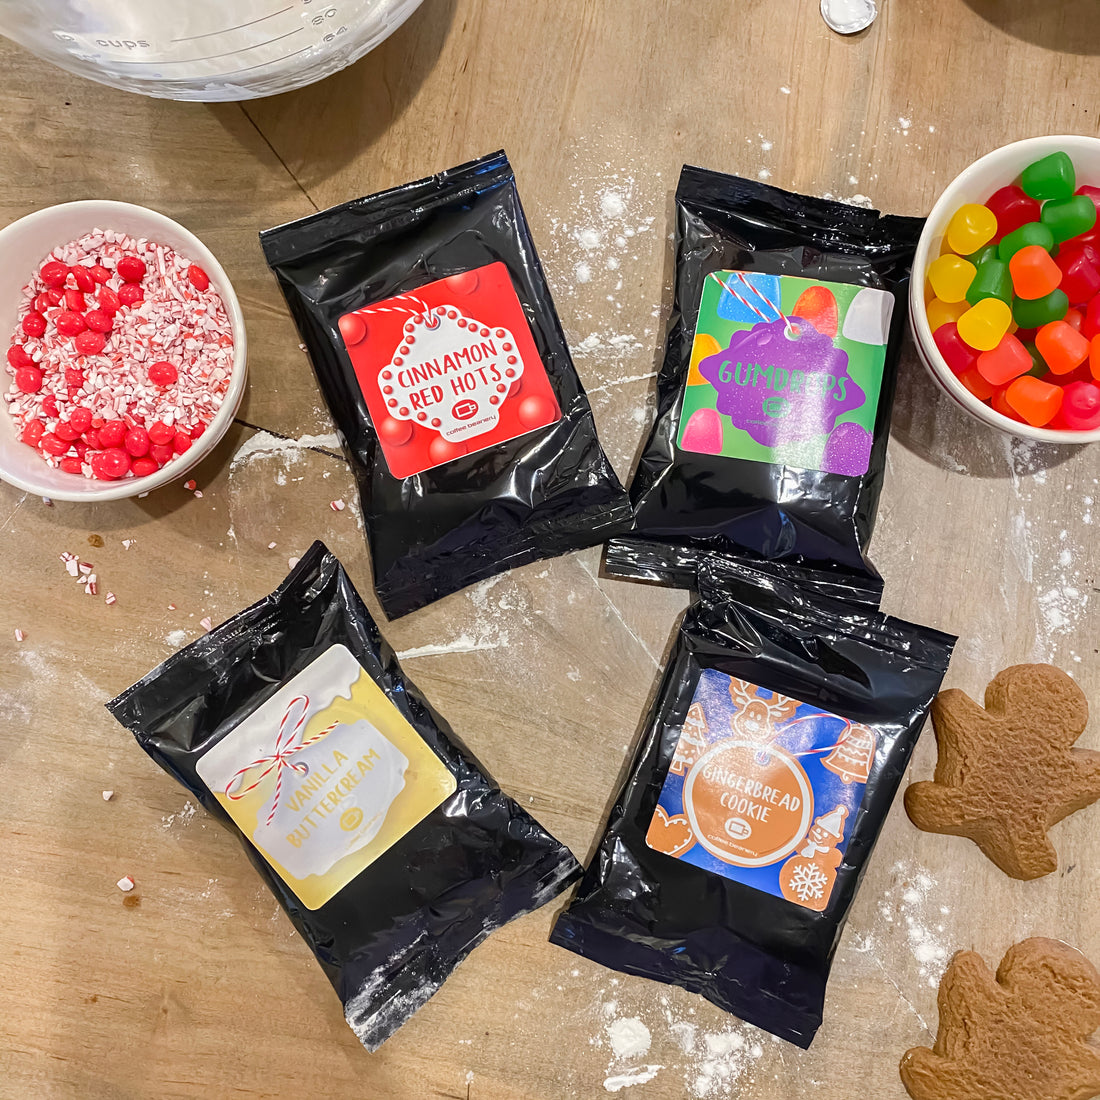 Coffee Subscription Box | December 2020 - Gingerbread Cookie